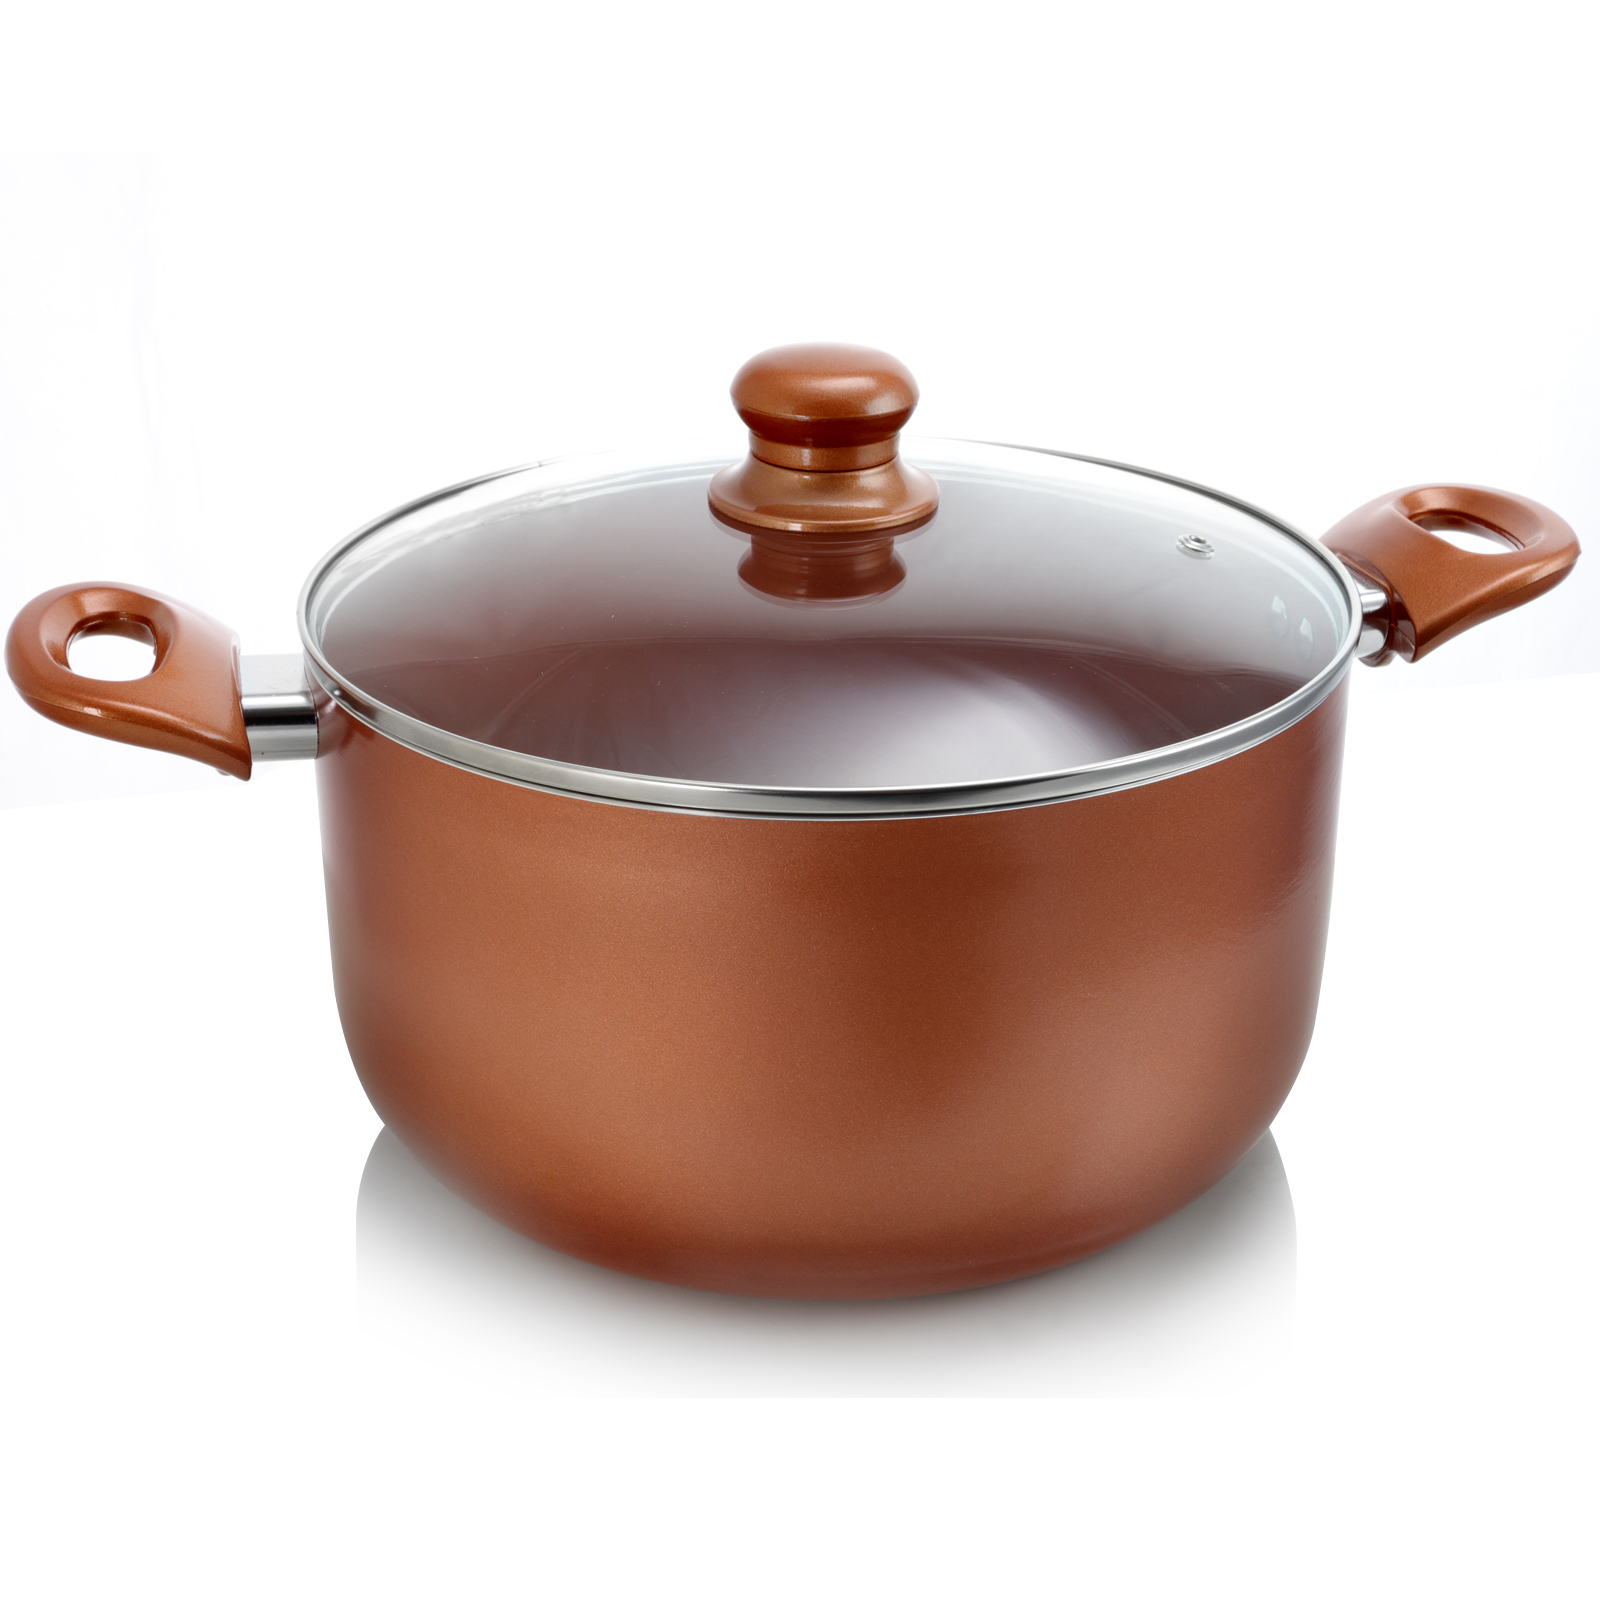 Better Chef  3 Qt. Copper Colored Ceramic Coated Dutchoven with glass lid